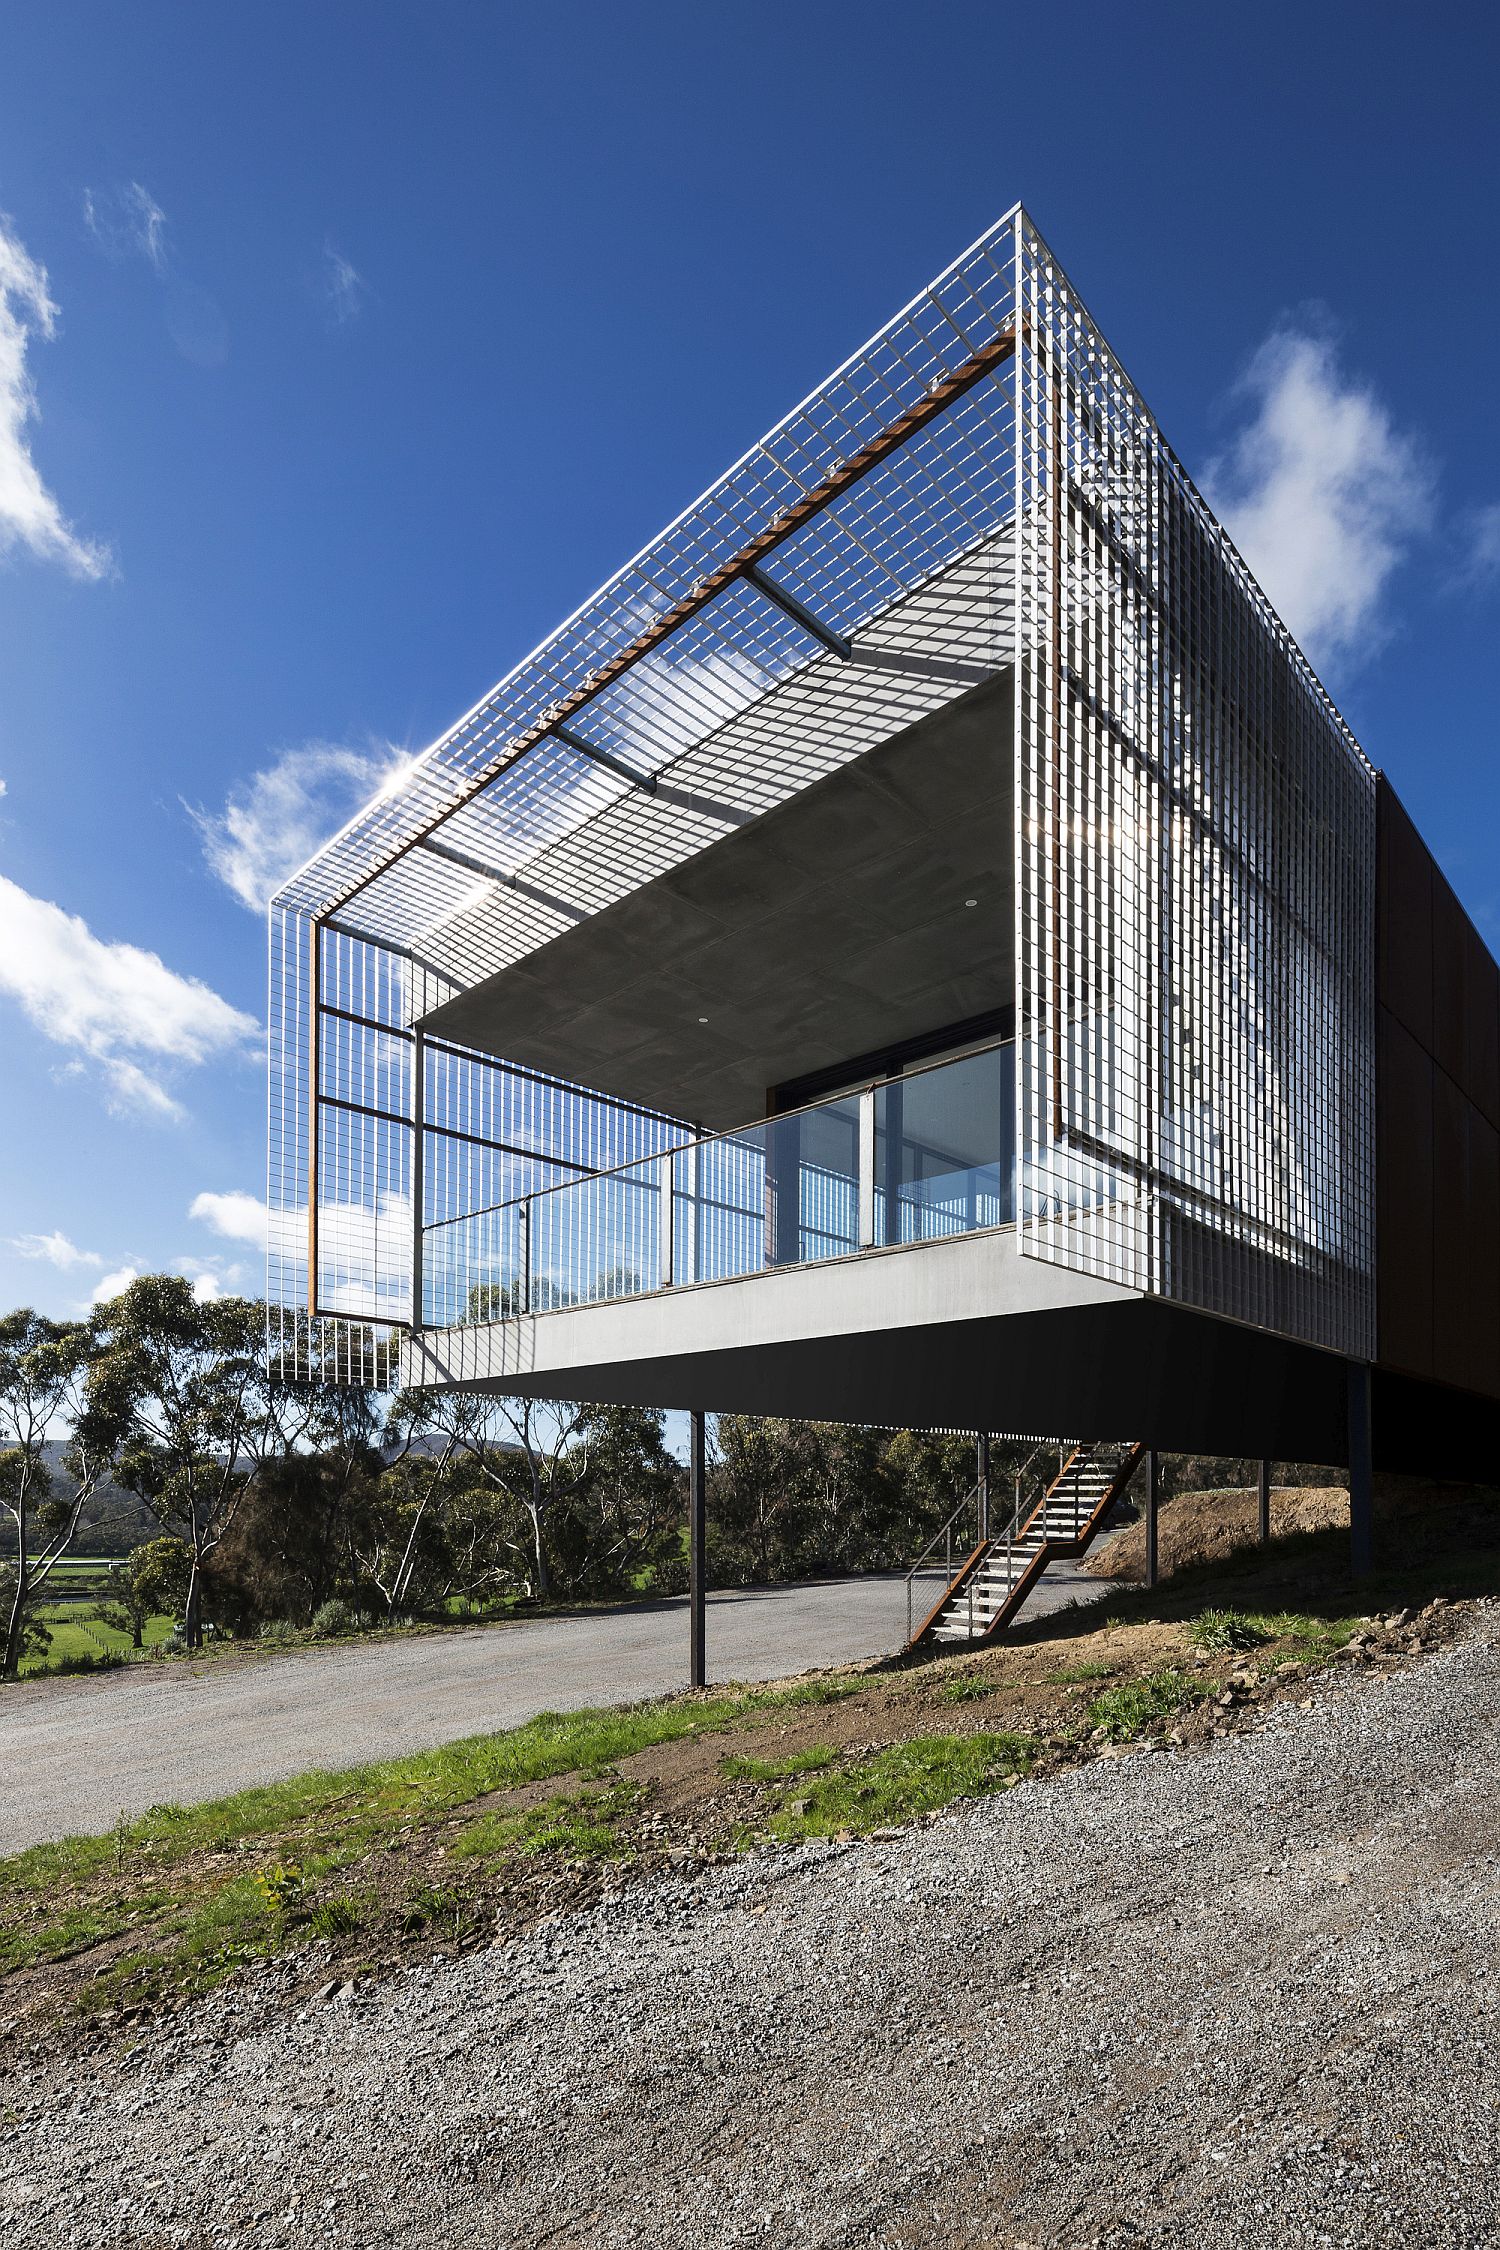 Deck of the Mount Macedon House cleverly concealed in a wiry frame